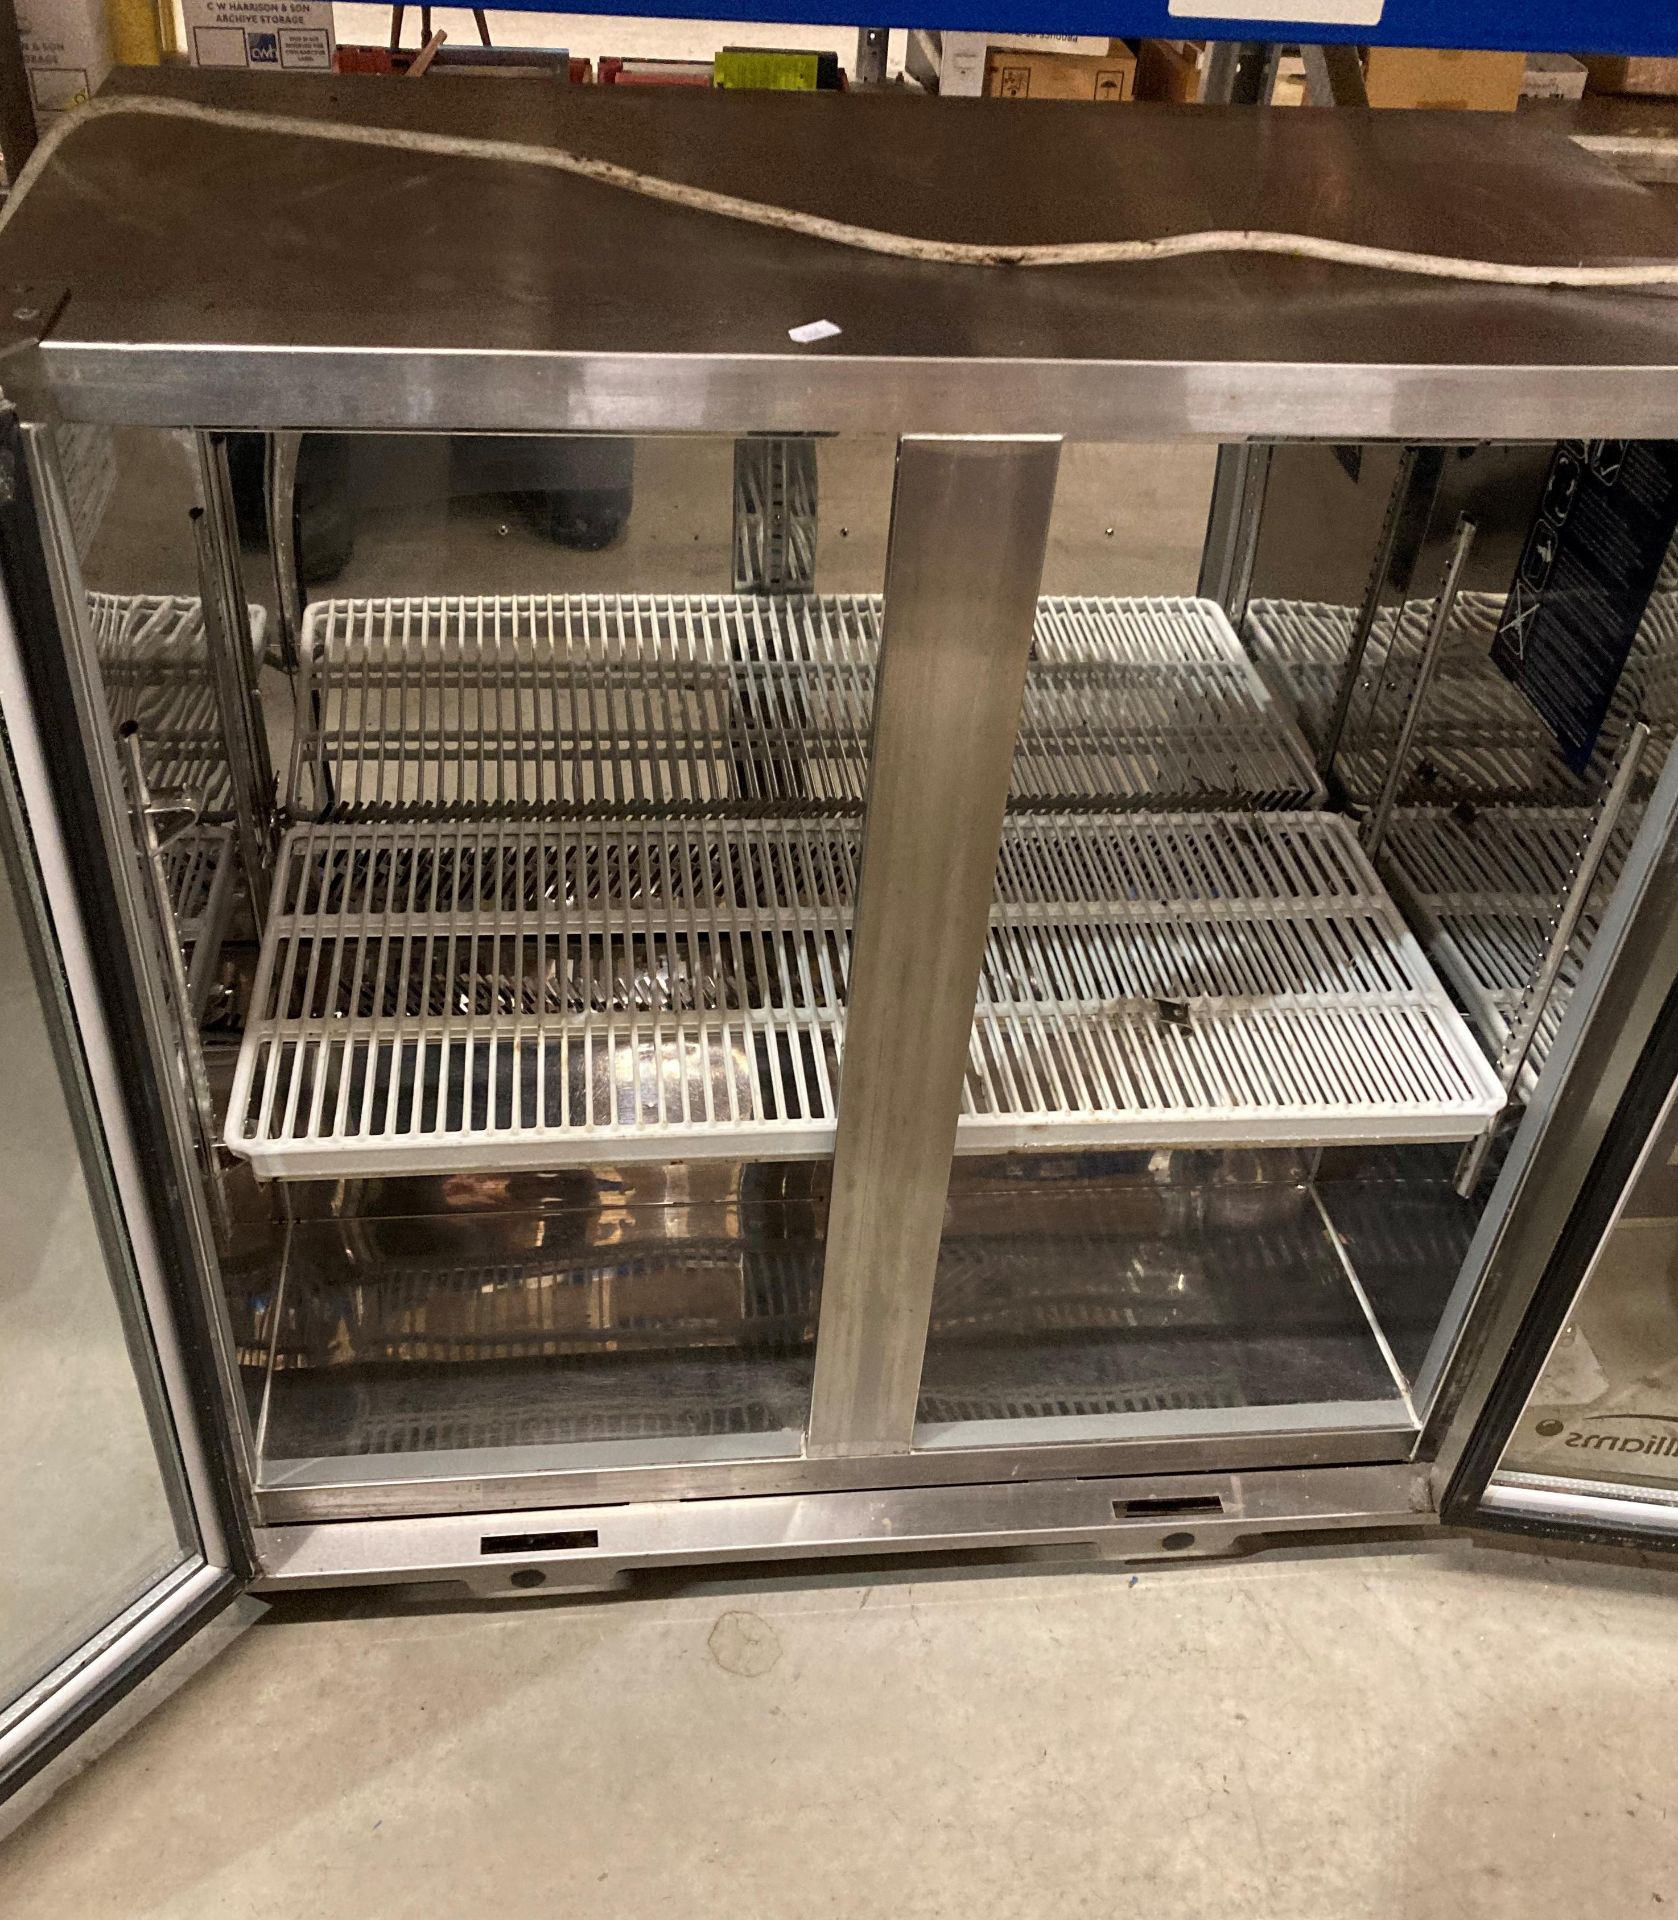 Williams stainless steel two-door glass front bottle chiller (saleroom location: R01) - Image 2 of 2